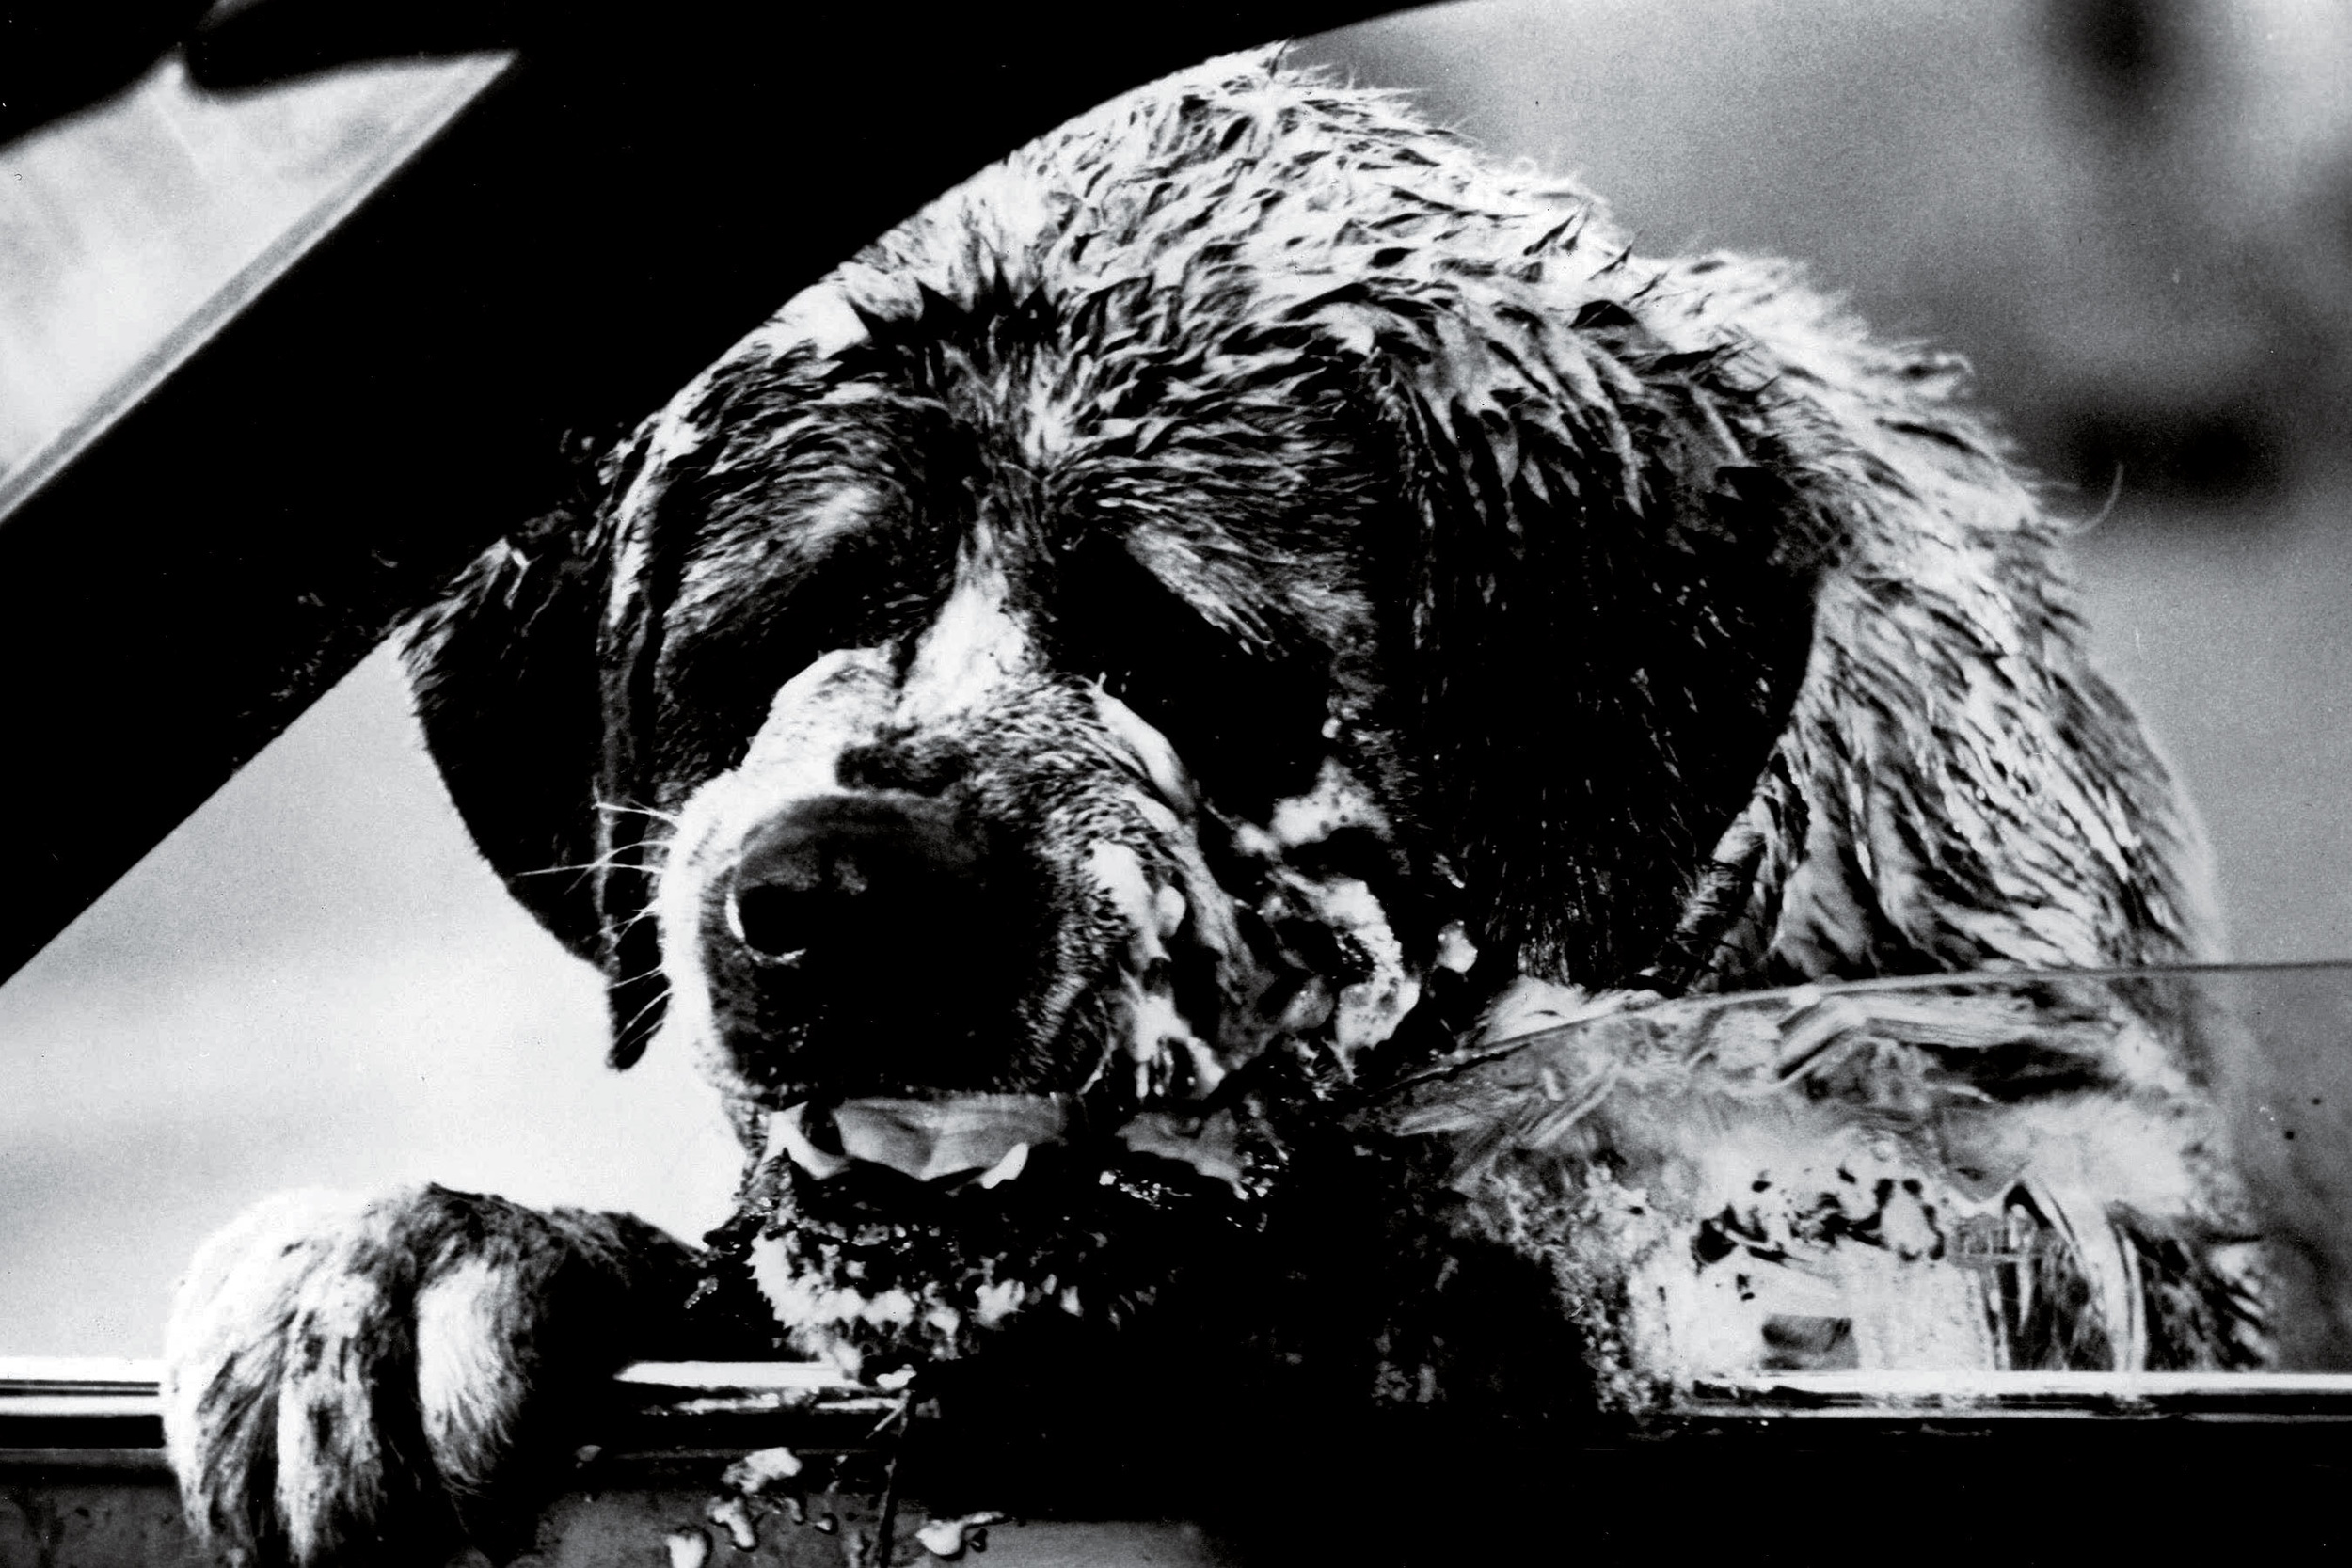 <p>Not all the dogs in this list need to be well-behaved, and Cujo is, without a doubt, our favorite bad dog. Based on the 1981 Stephen King horror novel of the same name, “Cujo” has been cited as one of the <a href="https://www.rollingstone.com/culture/culture-features/stephen-king-the-rolling-stone-interview-191529/" rel="noopener noreferrer">author’s favorite adaptations of his work</a>, along with "The Shawshank Redemption" and "Stand By Me." </p>